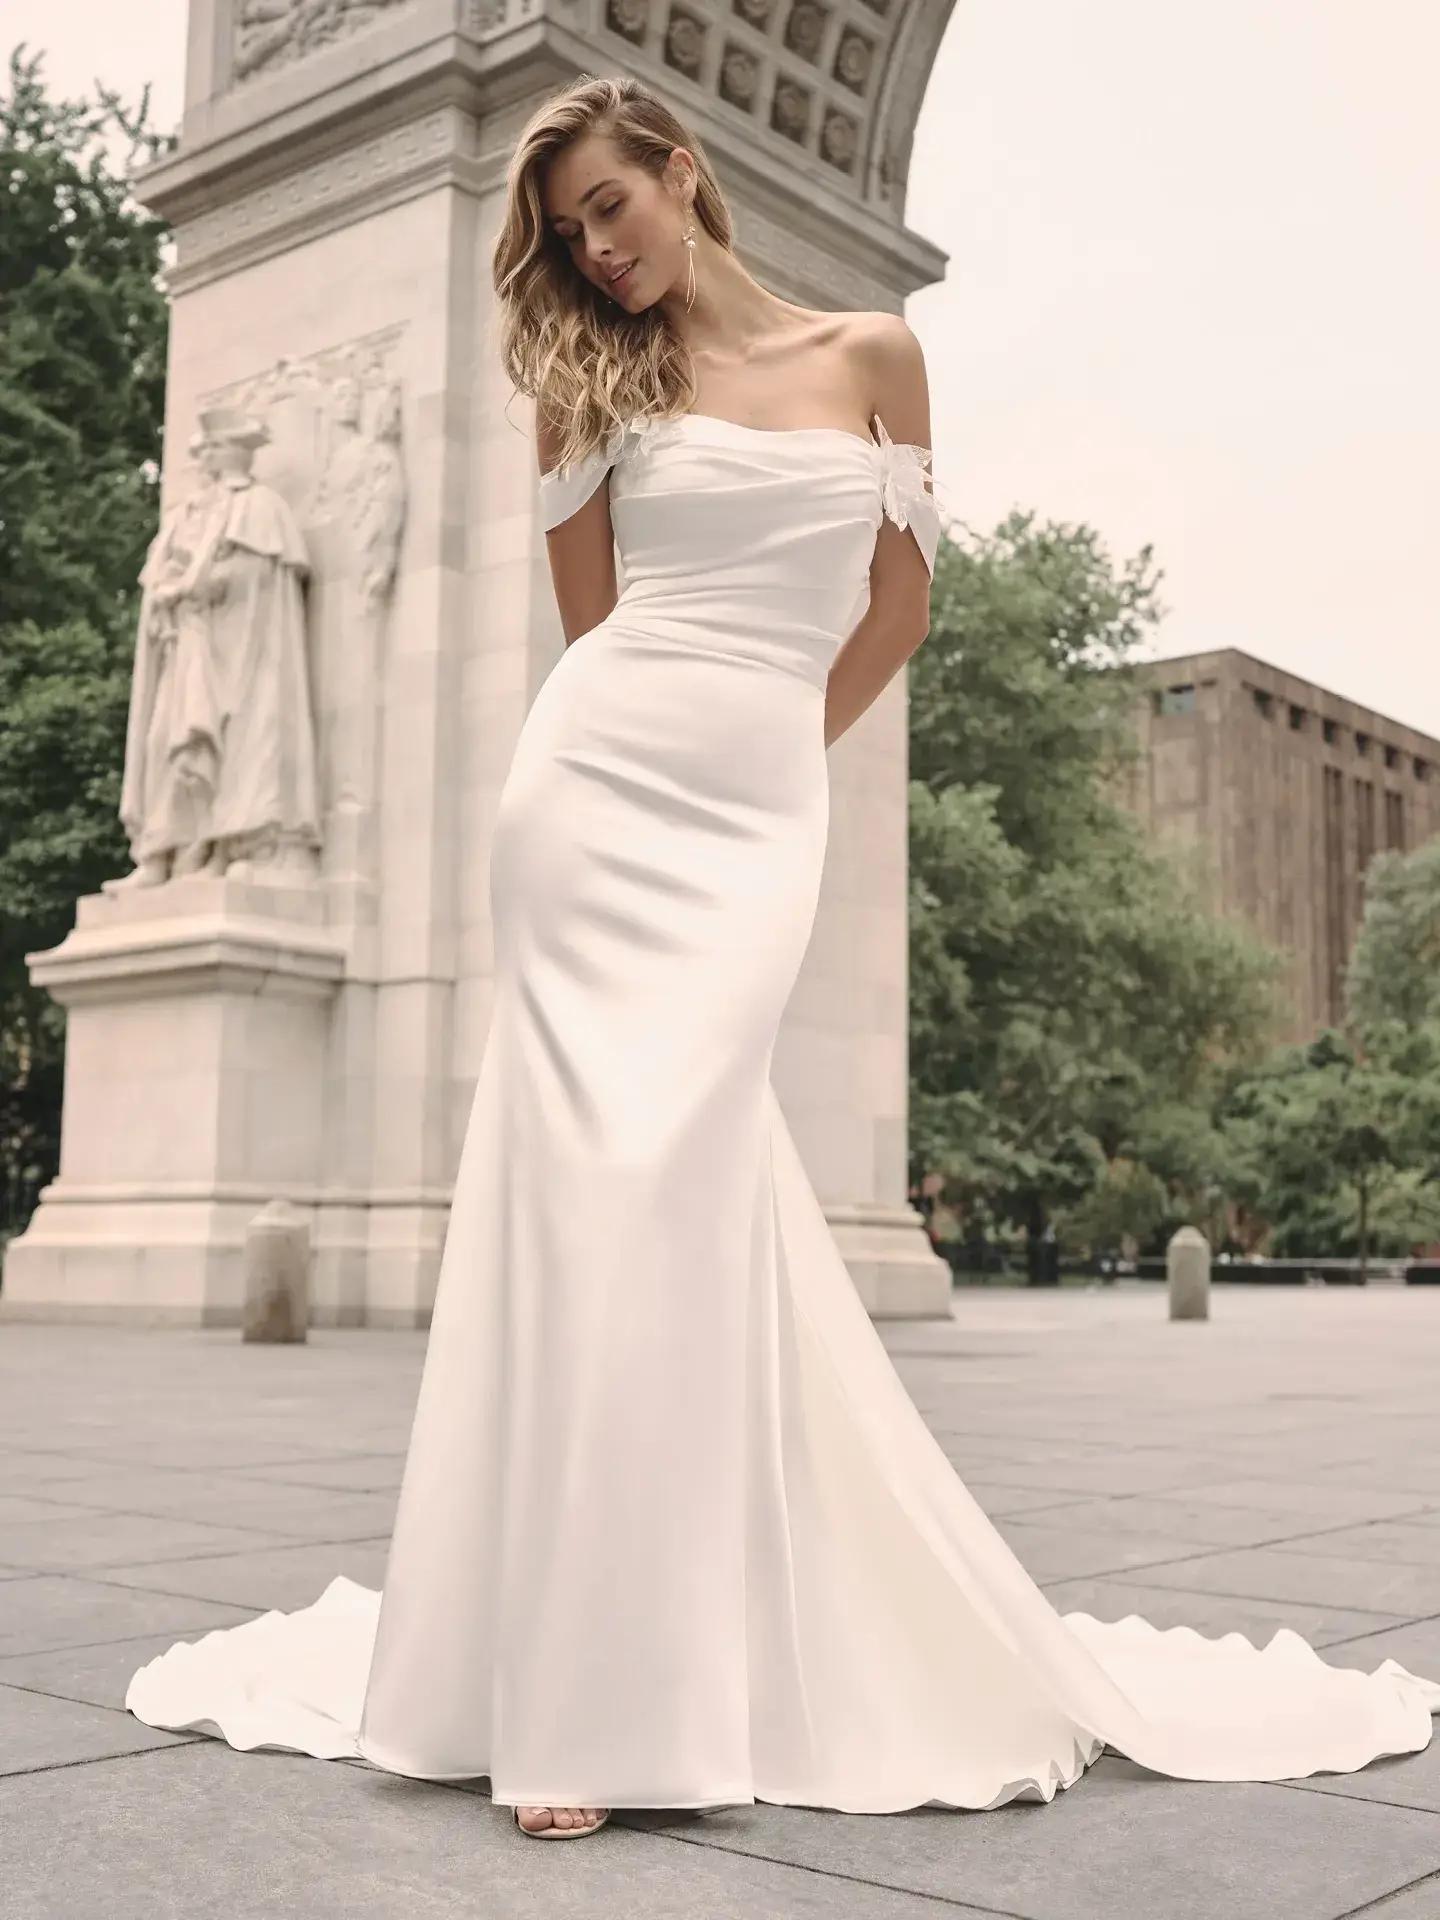 Maggie Sottero Trunk Show